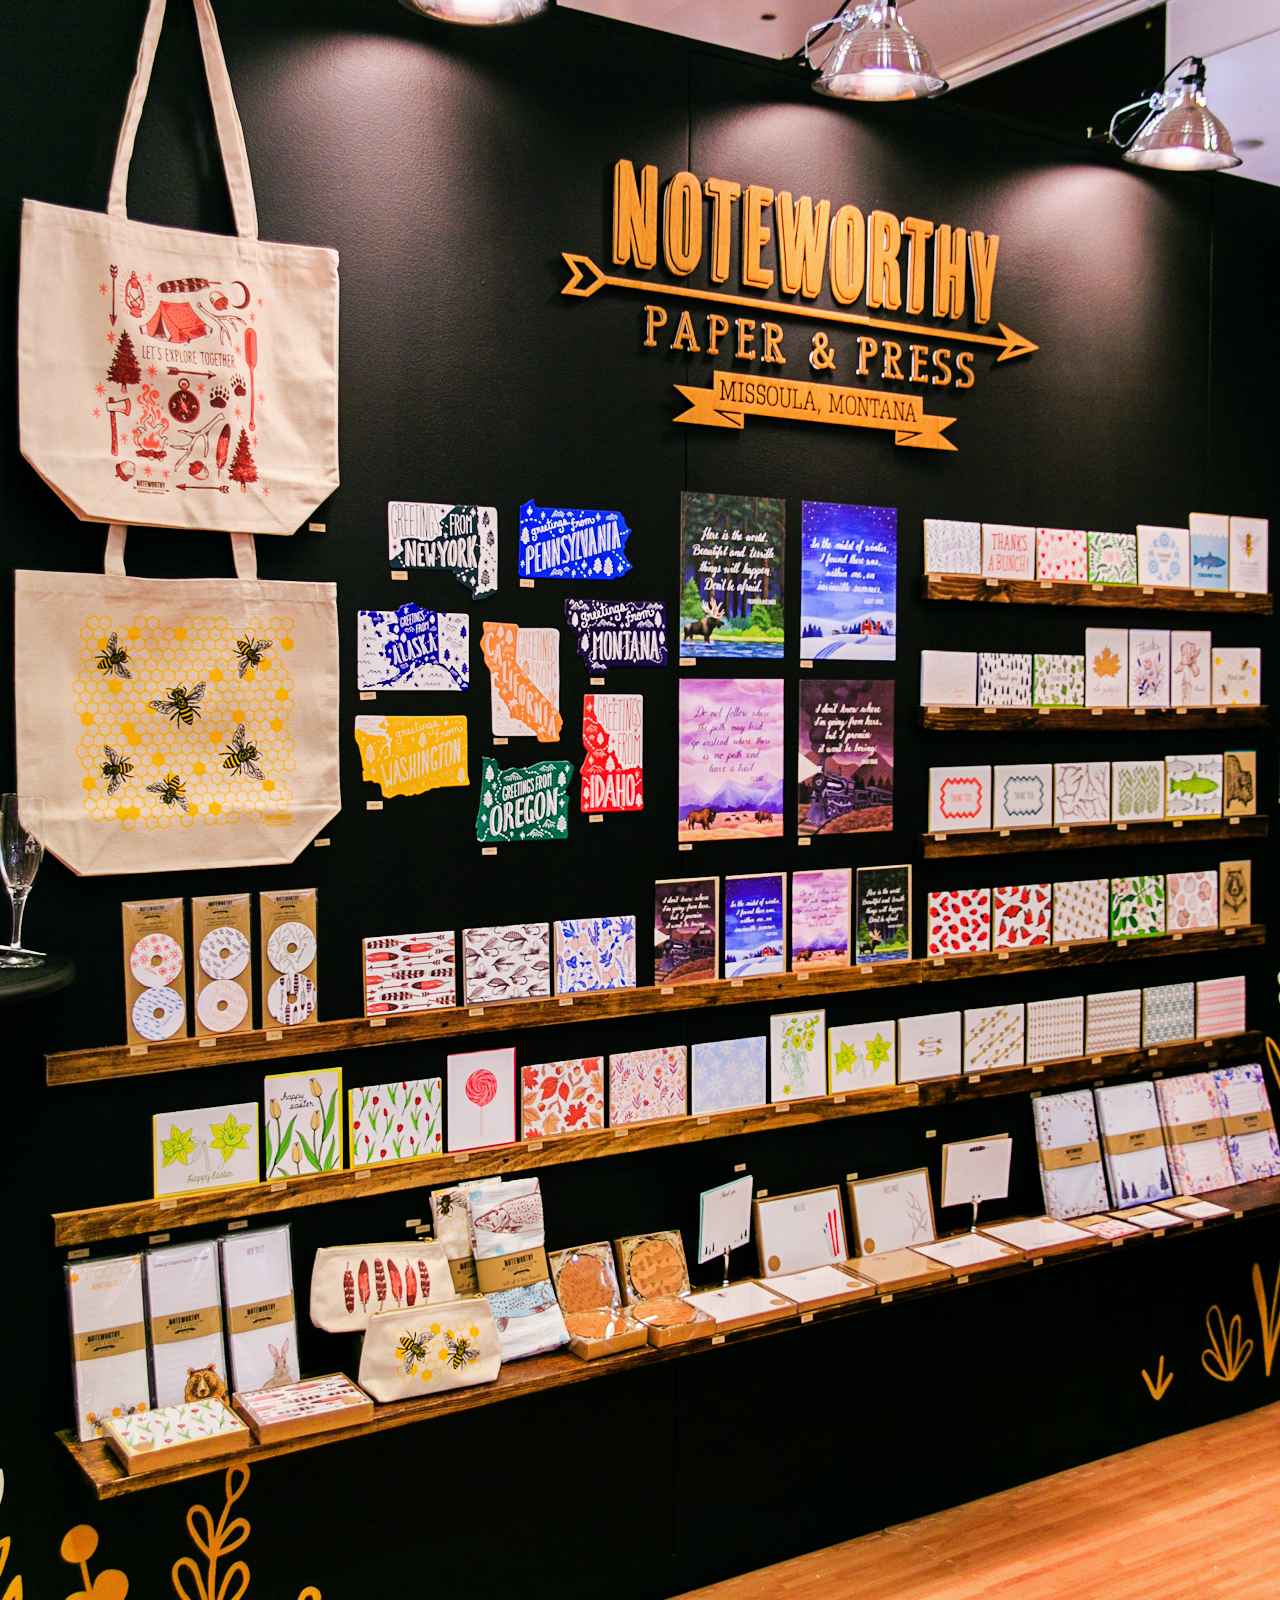 NSS 2016: Noteworthy Paper & Press / Oh So Beautiful Paper